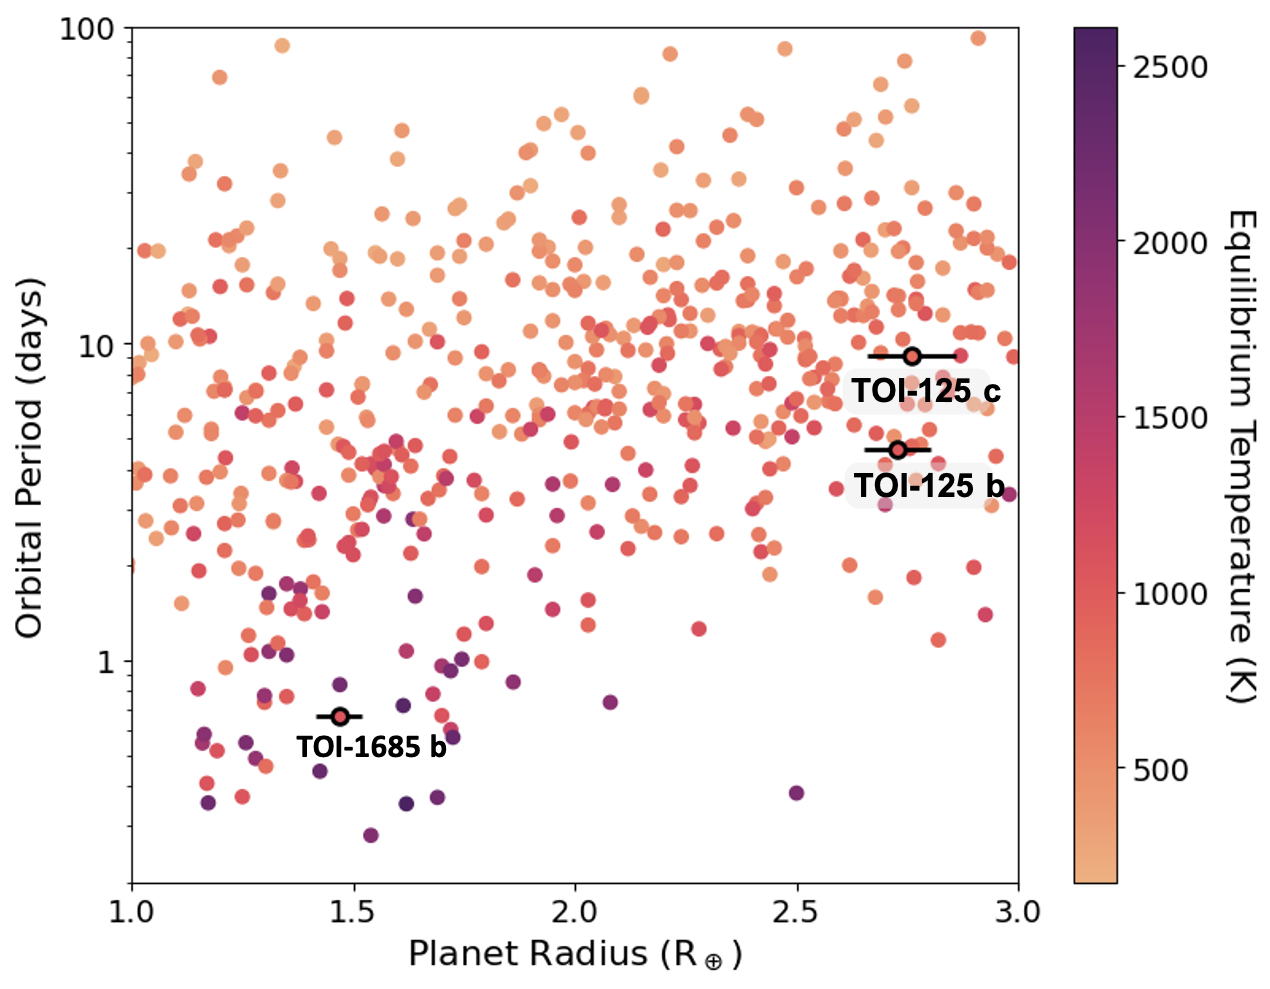 Orbital period vs radius plot, coloured by equilibrium temperature. TOI-125 b and c and TOI-1685 b are marked on the plot.